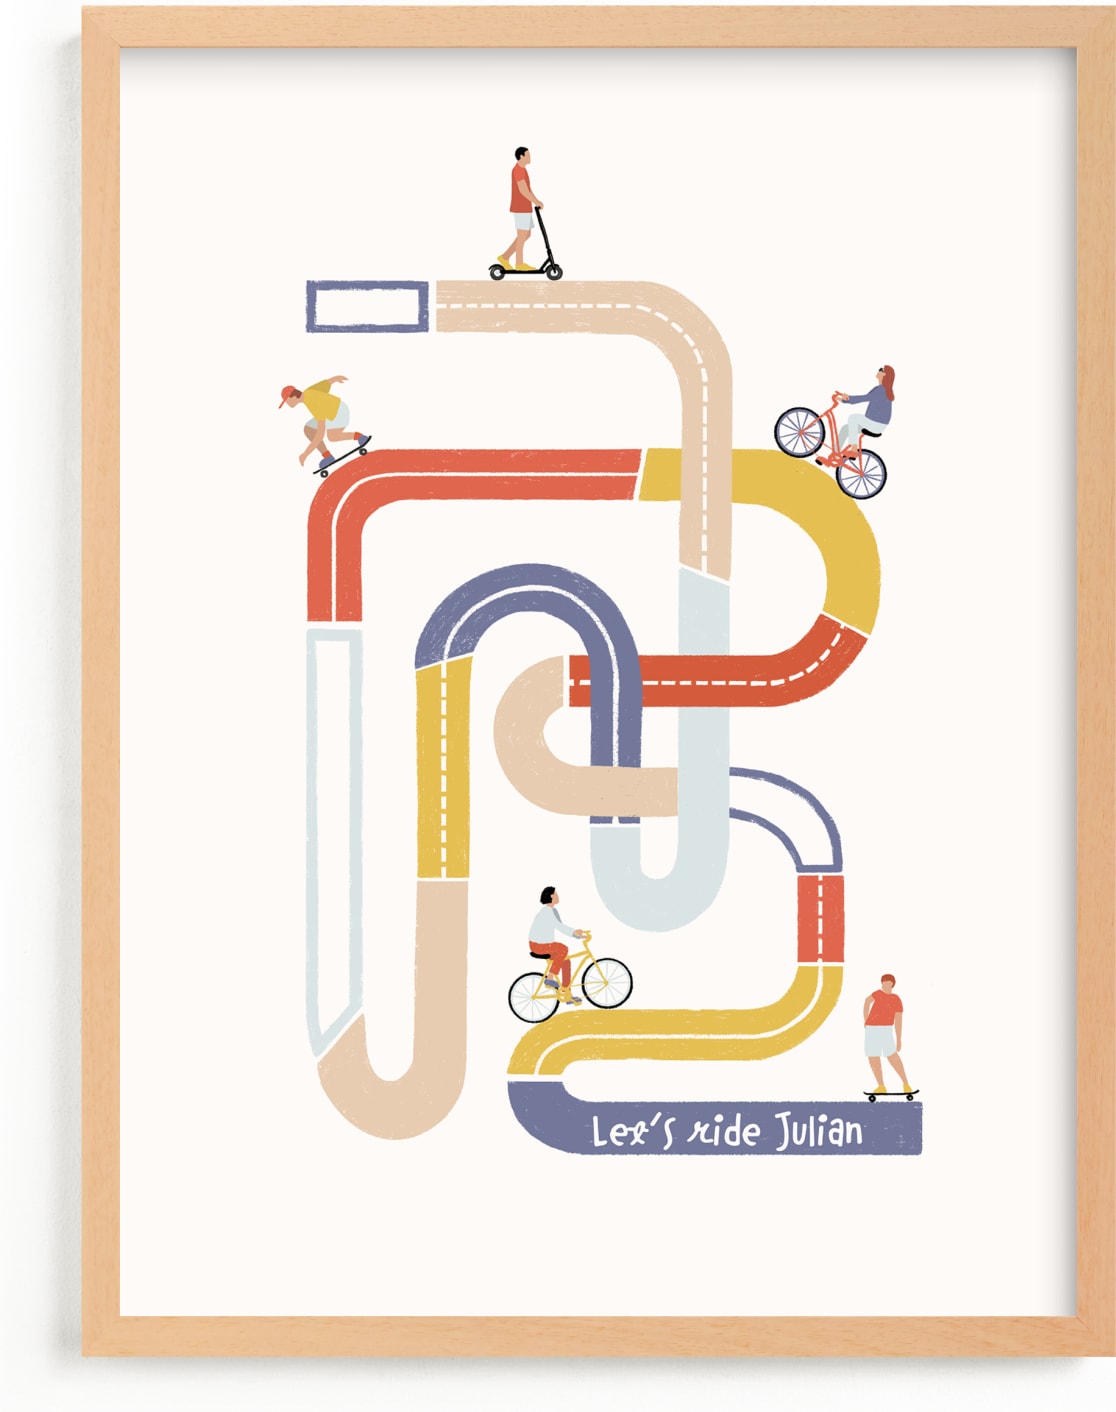 This is a colorful personalized art for kid by Pati Cascino called So many roads to ride.